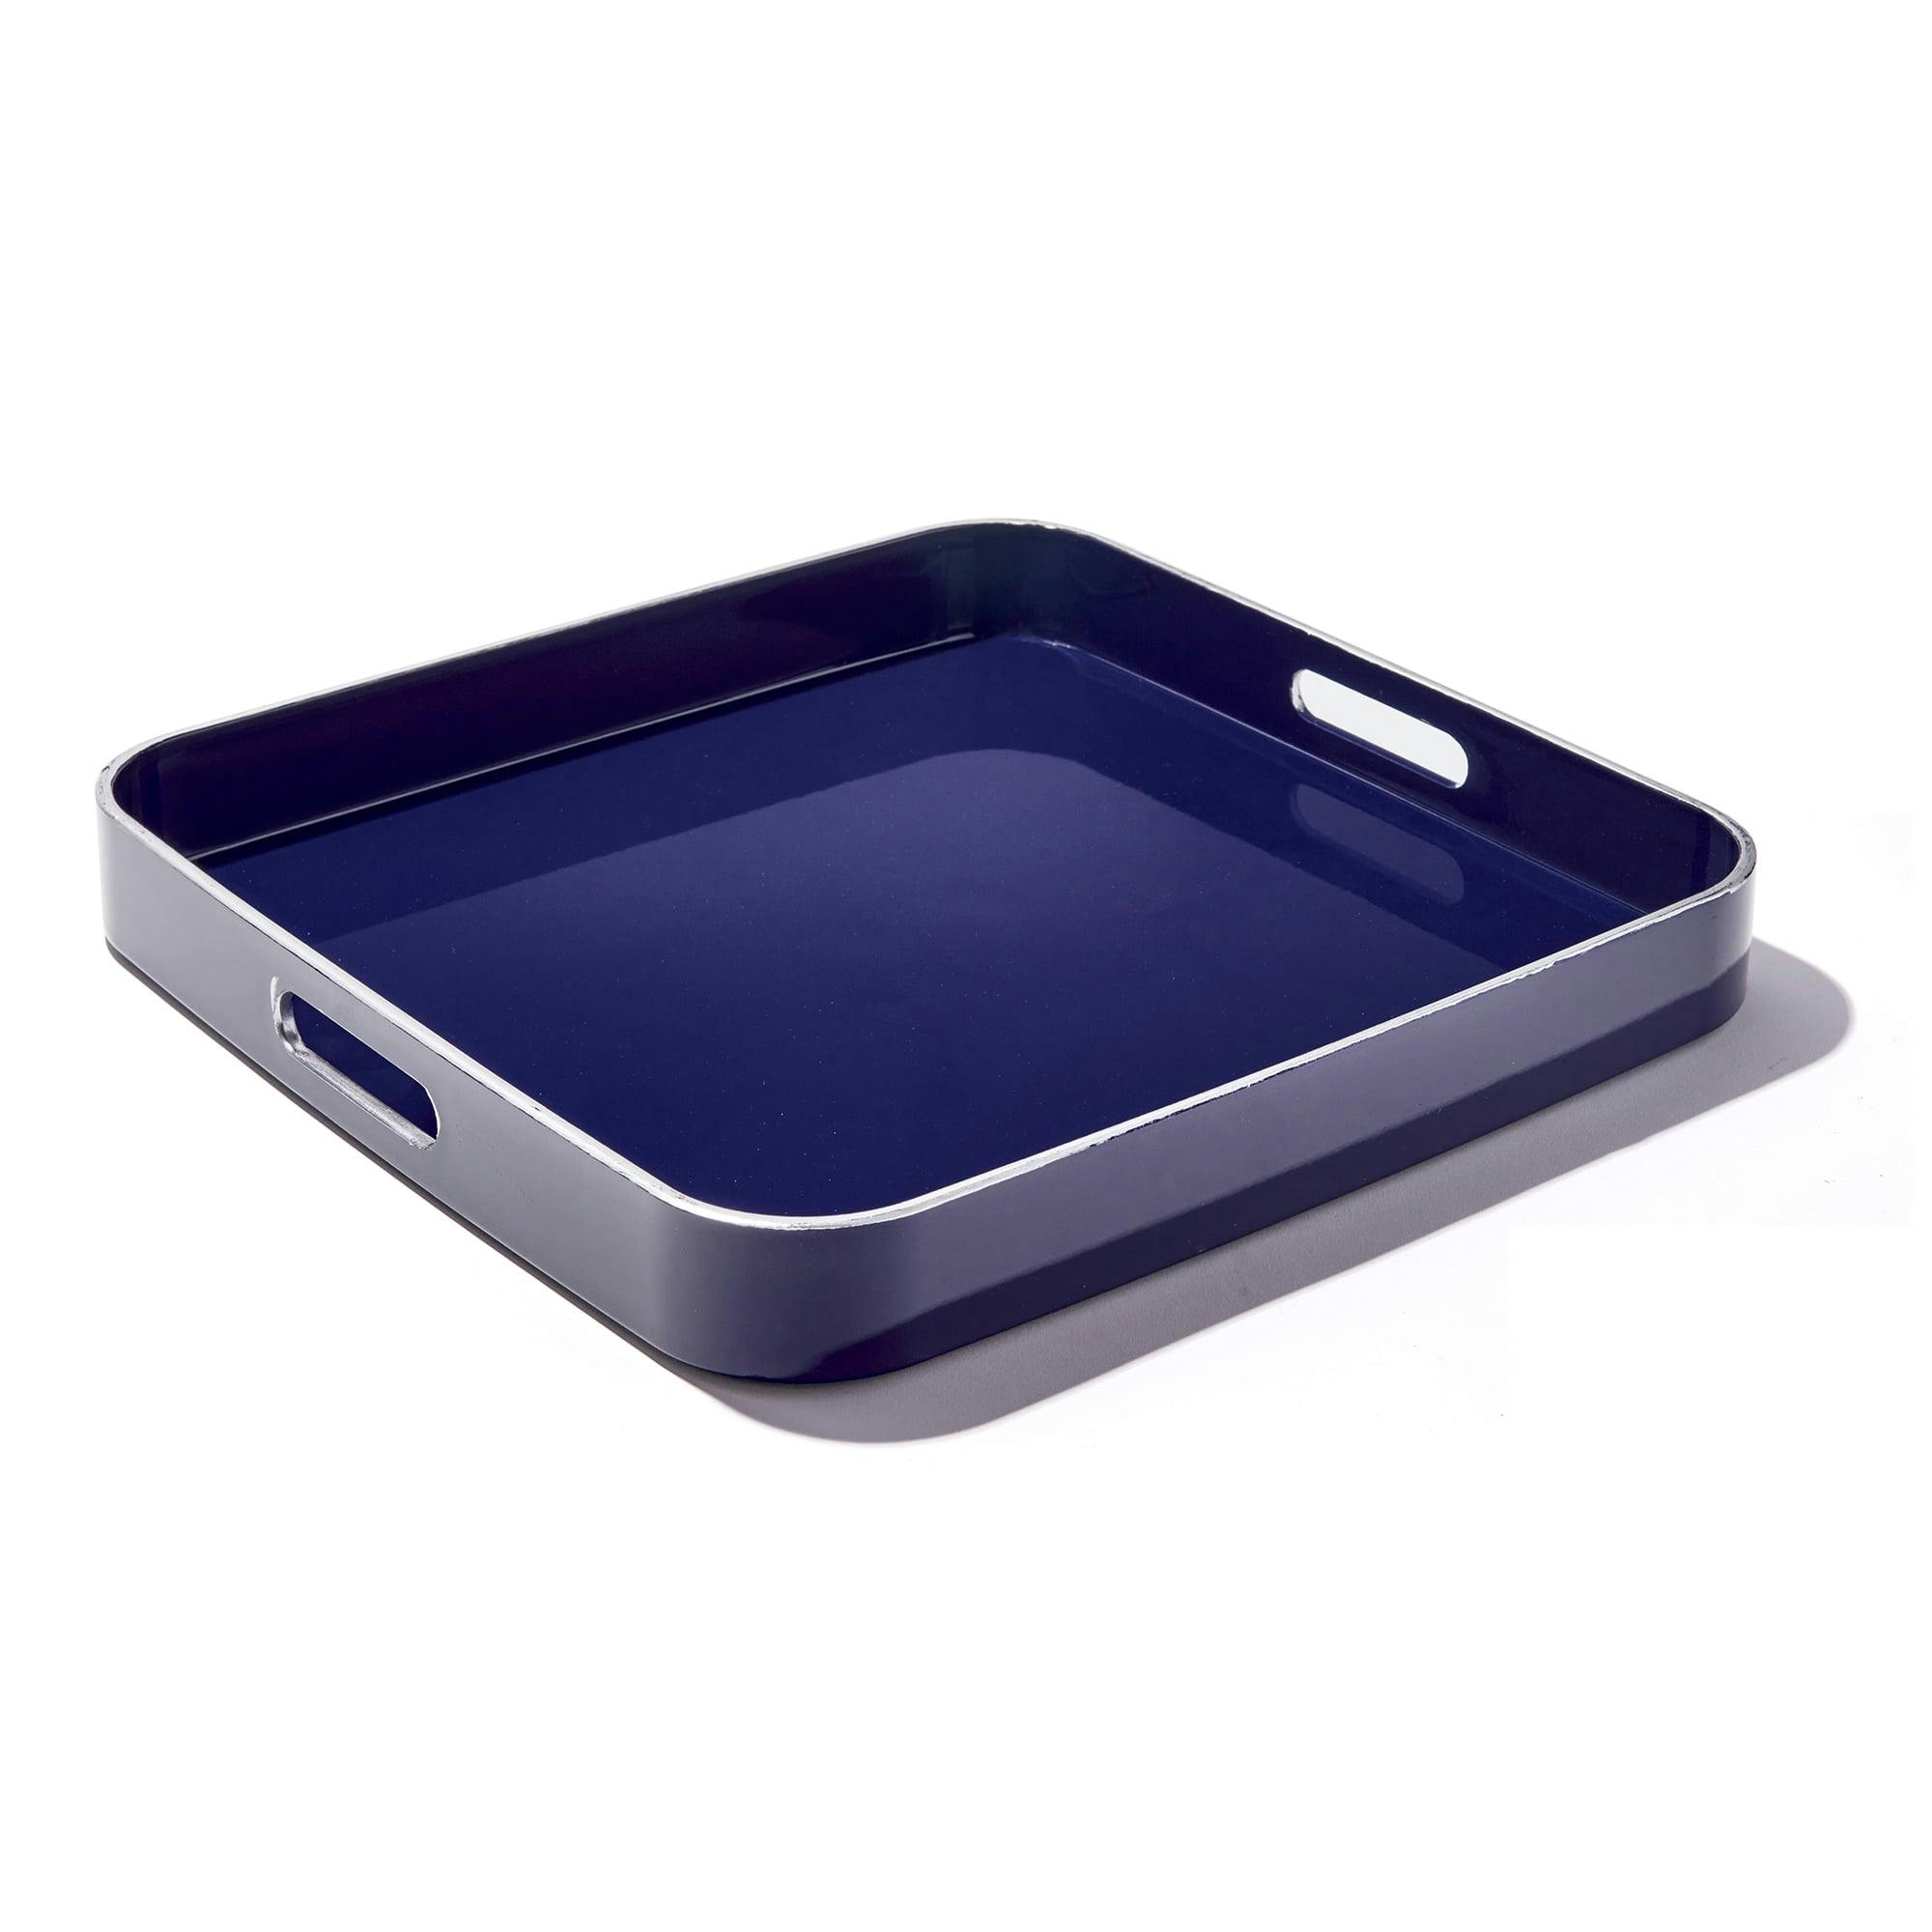 Navy Blue Polished Polypropylene Square Serving Tray with Silver Rim, Set of 2